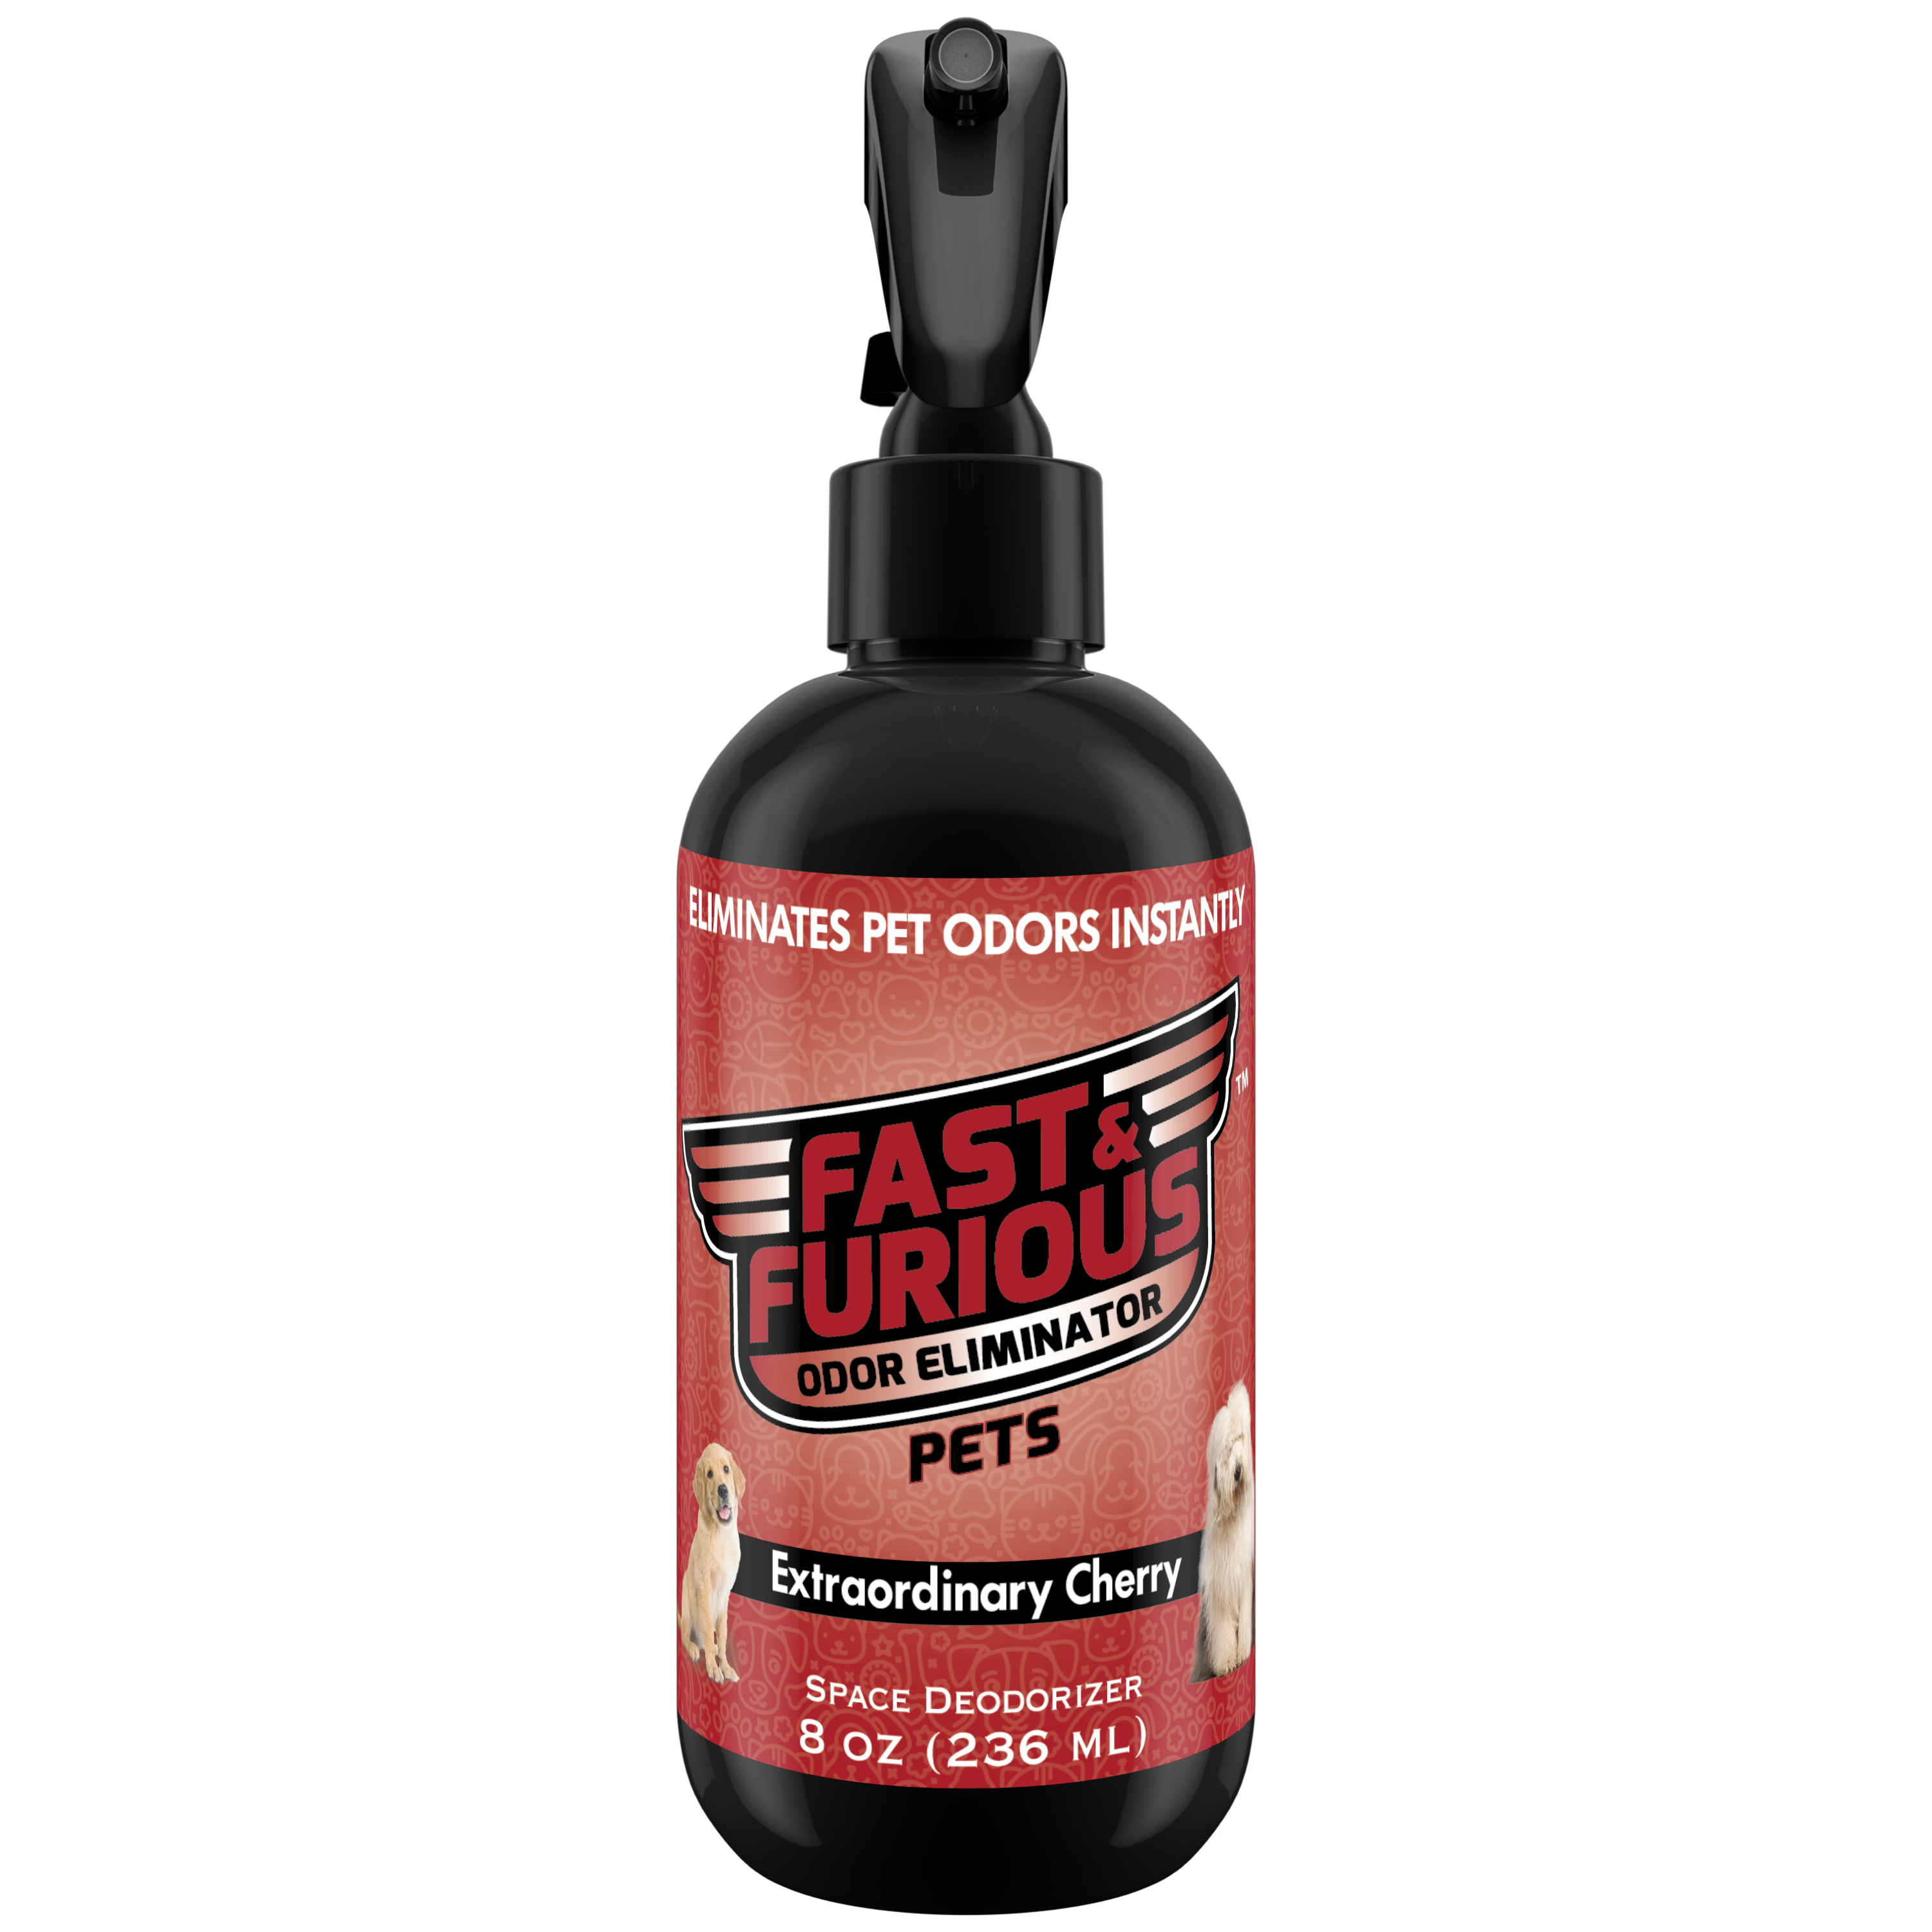 Fast and Furious Pets Odor Eliminator - Extraordinary Cherry Scent